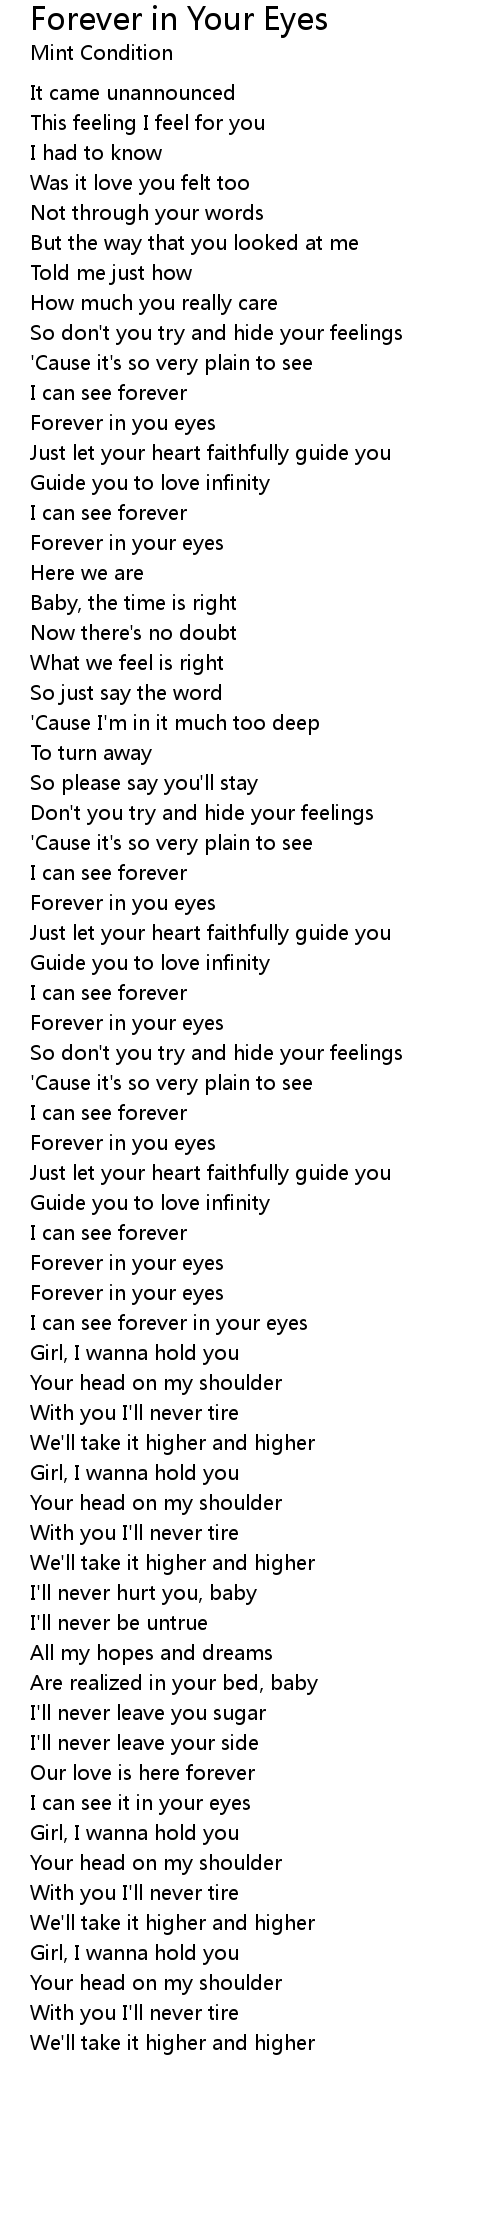 Your forever eyes see in i Show Chapter